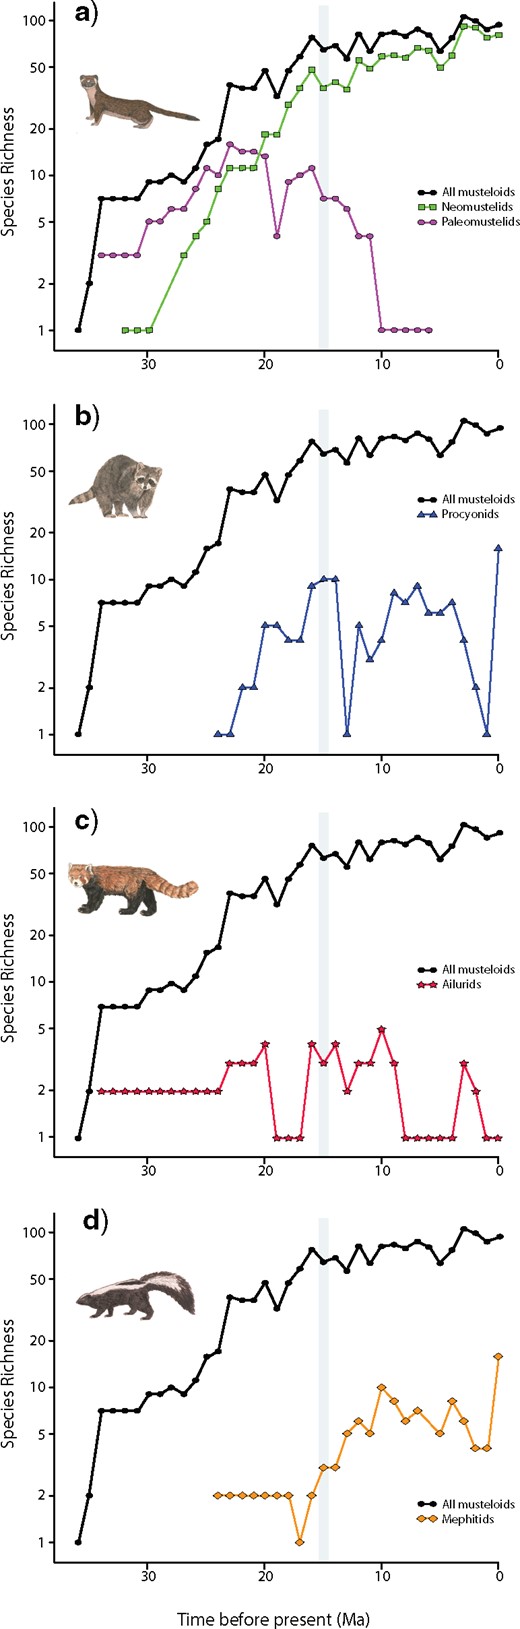 Species richness of Mustelidae (a), Procyonidae (b), Ailuridae (c), and Mephitidae (d) across the past 37 Ma. The black curve in each of plot denotes total musteloid richness. The grey bar indicates the Mid-Miocene Climate Transition. Colored curves denote species richness of each respective clade: green squares $=$ neomustelids; pink circles $=$ paleomustelids; blue triangles $=$ procyonids; red stars $=$ ailurids; orange diamonds $=$ mephitids.